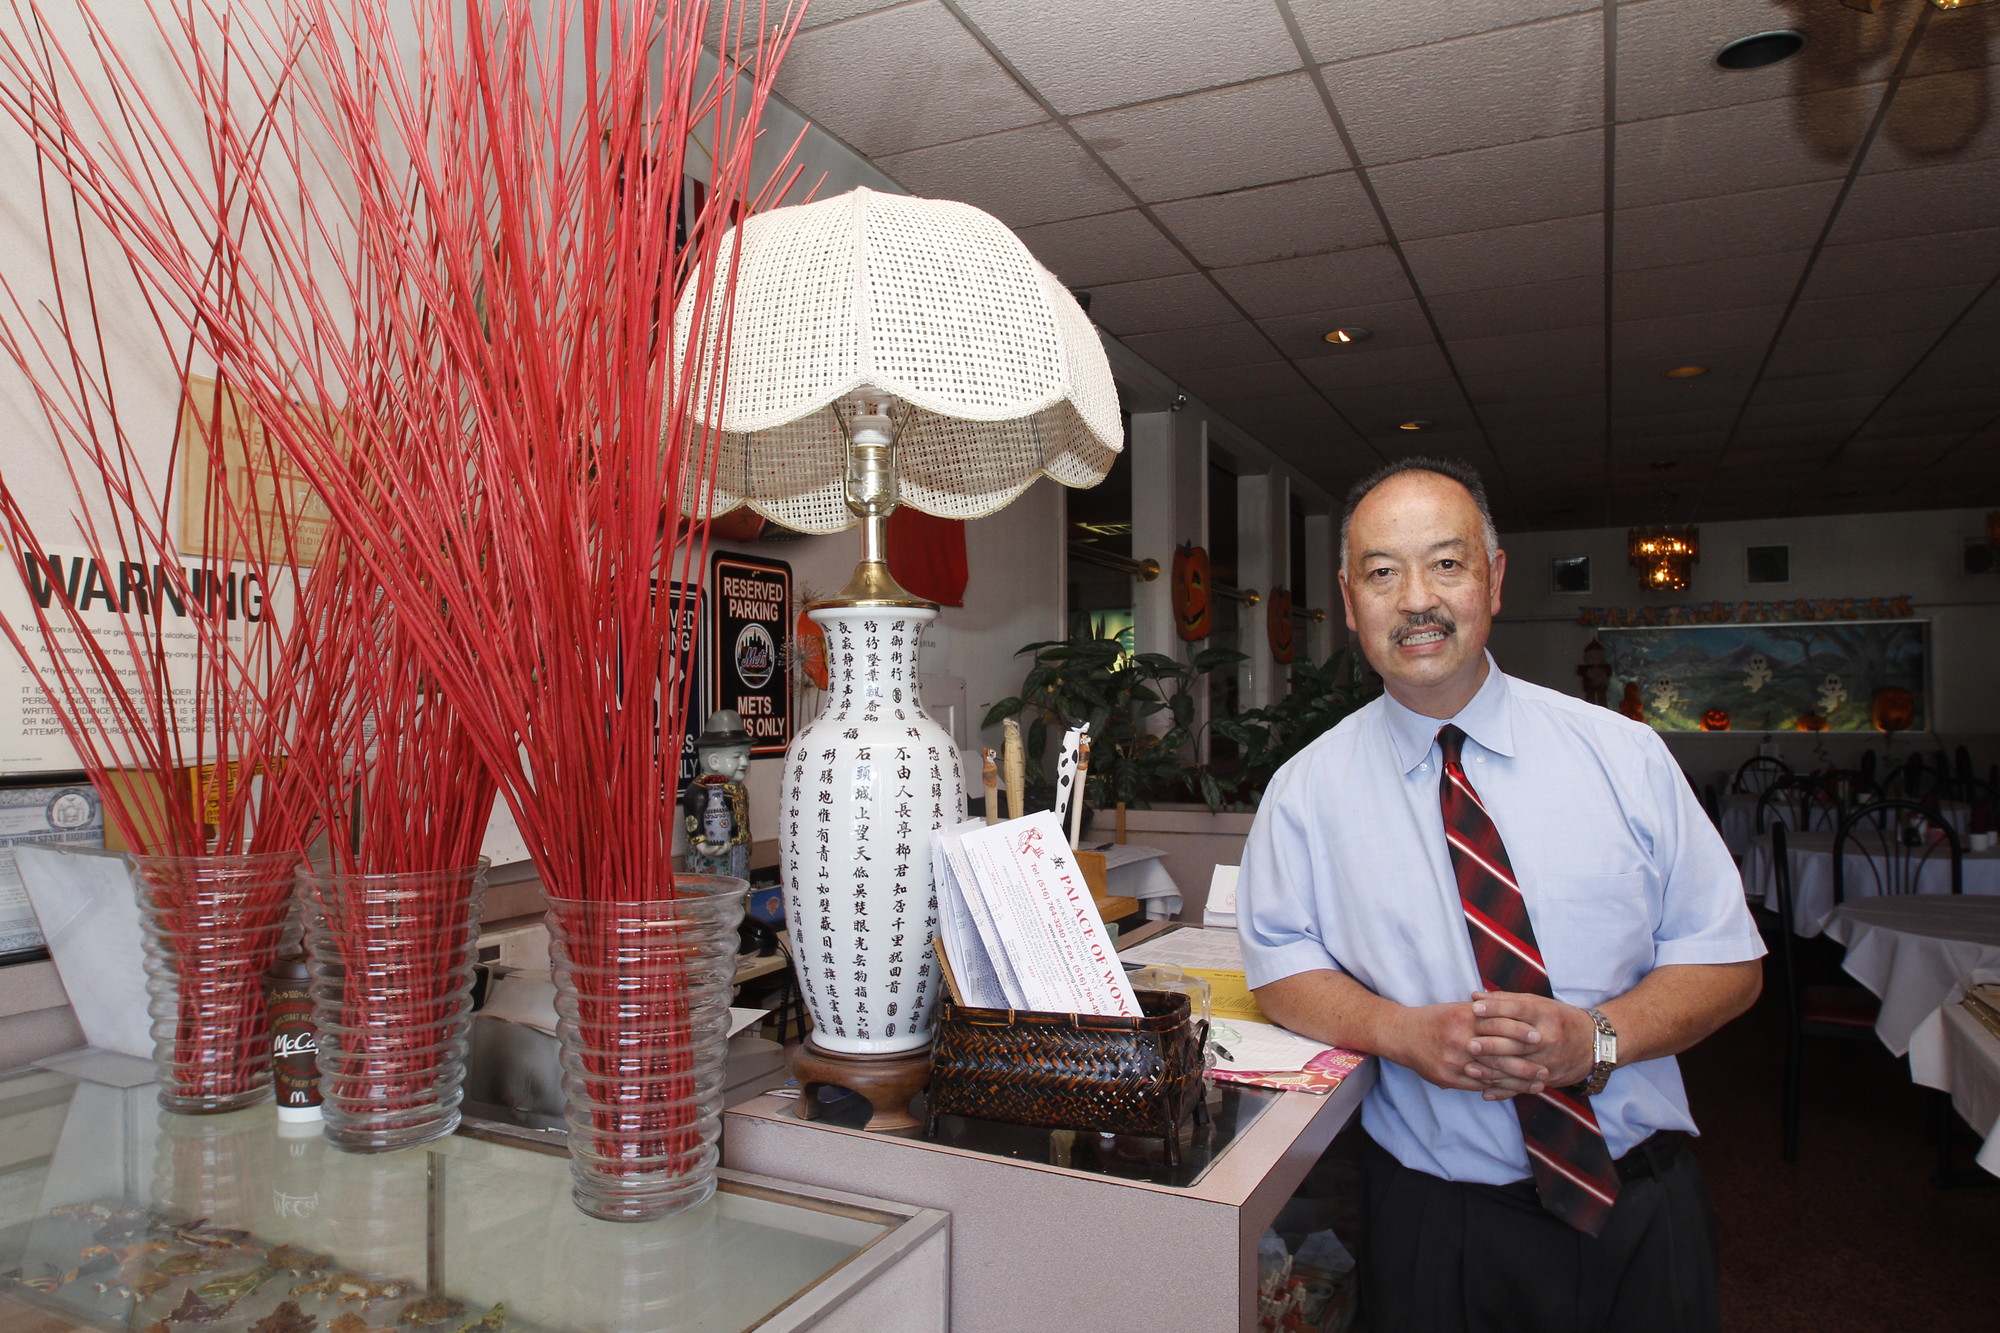 David Wong said one of Palace of Wong’s draws for customers was its classic Cantonese restaurant styling.